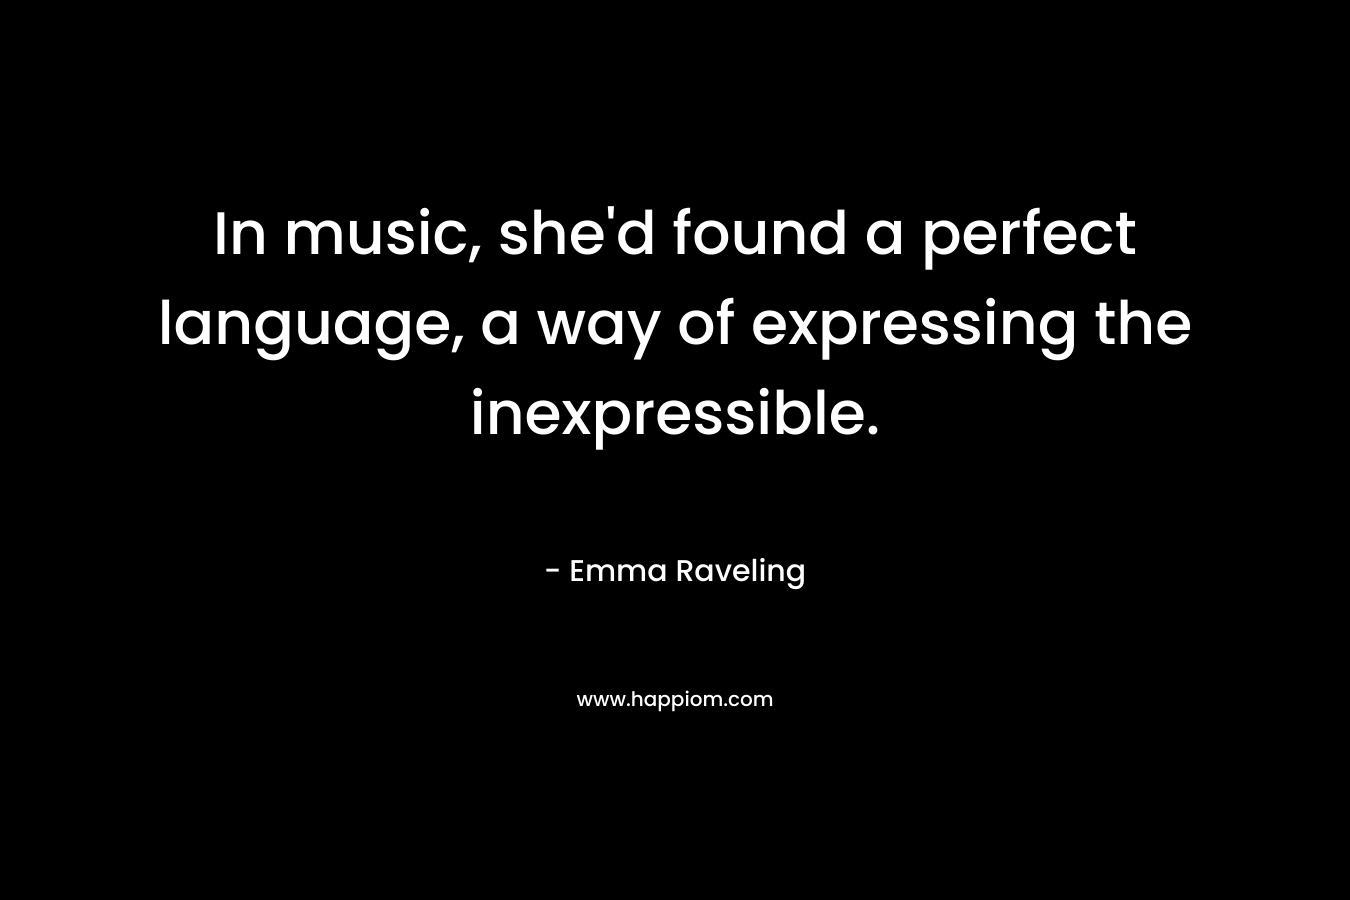 In music, she’d found a perfect language, a way of expressing the inexpressible. – Emma Raveling